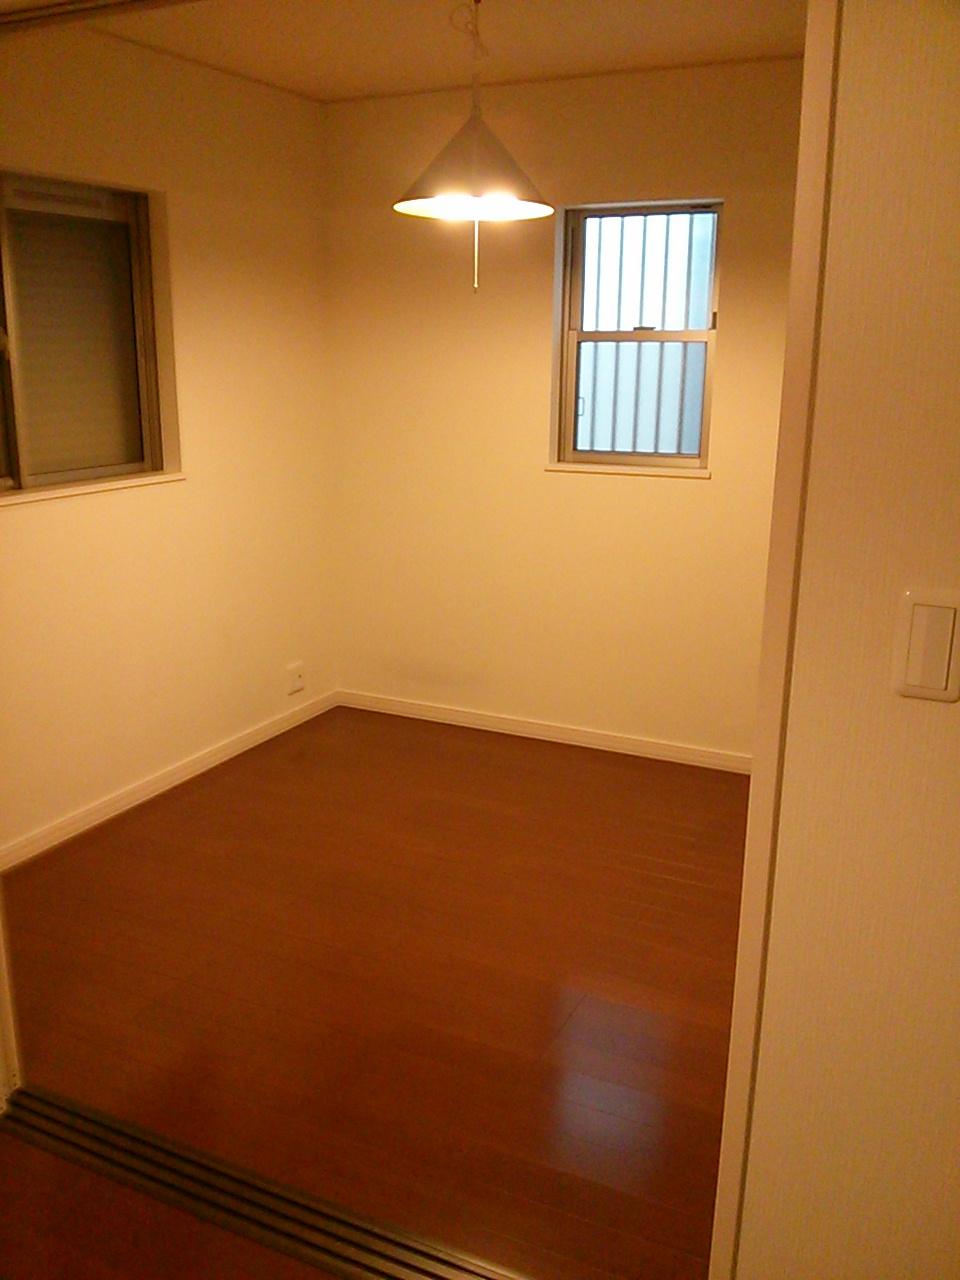 Non-living room. It is north of 4.5 Pledge of Western-style. 